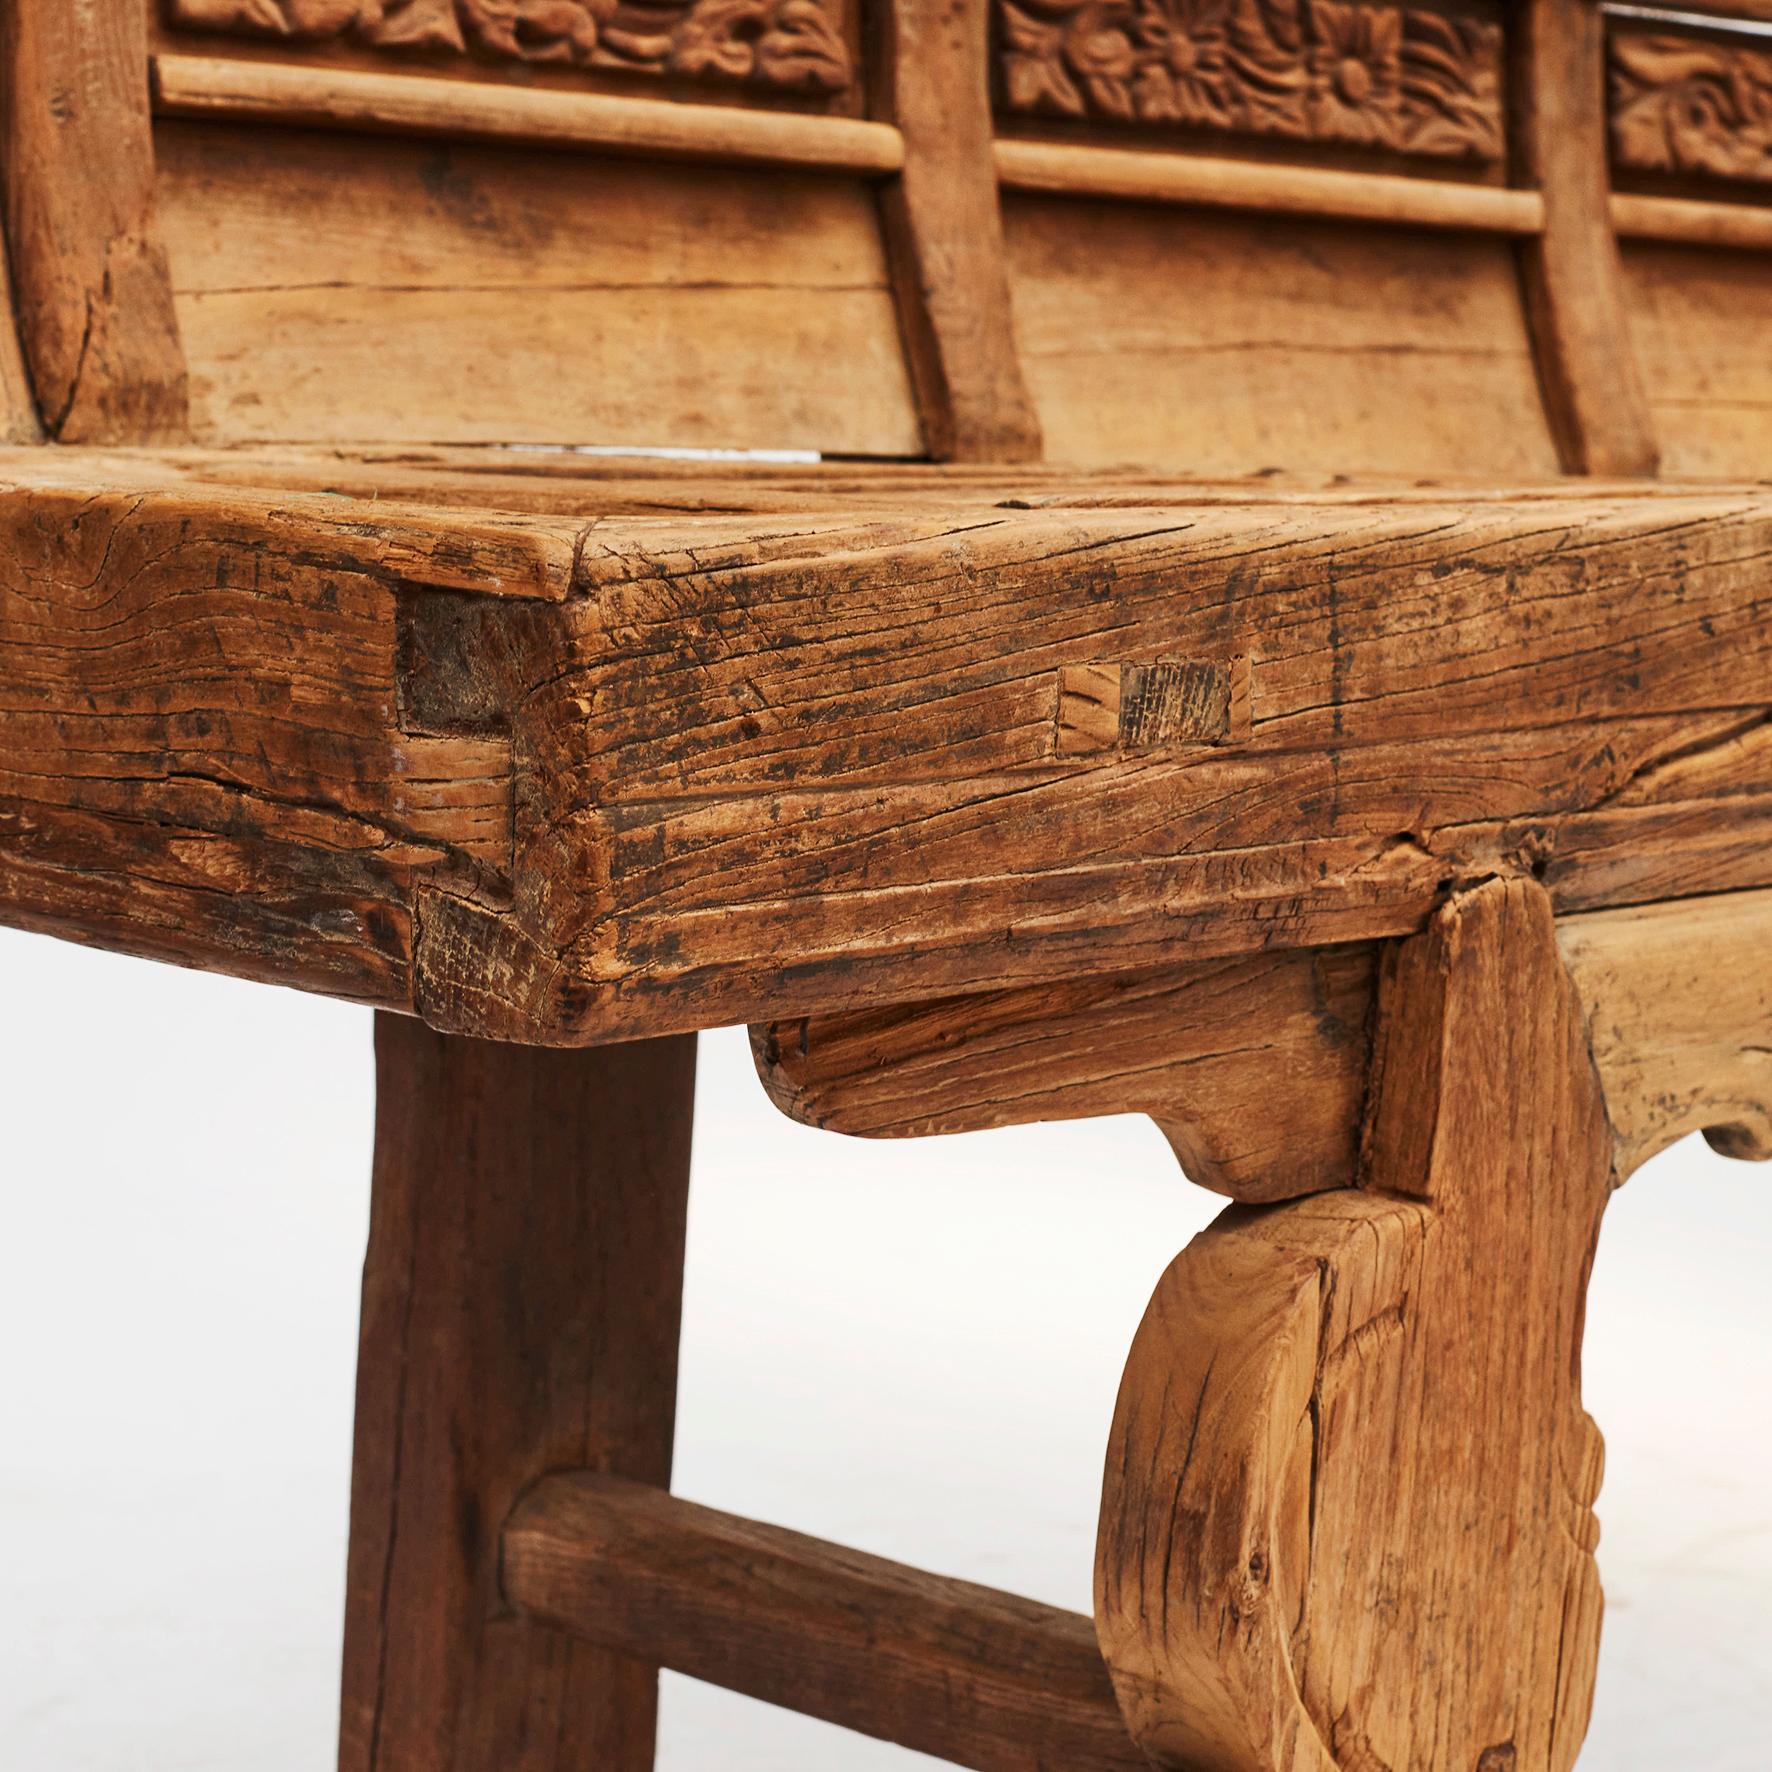 Antique Ming Temple Bench with Carved Details 17'th Ctr. 2